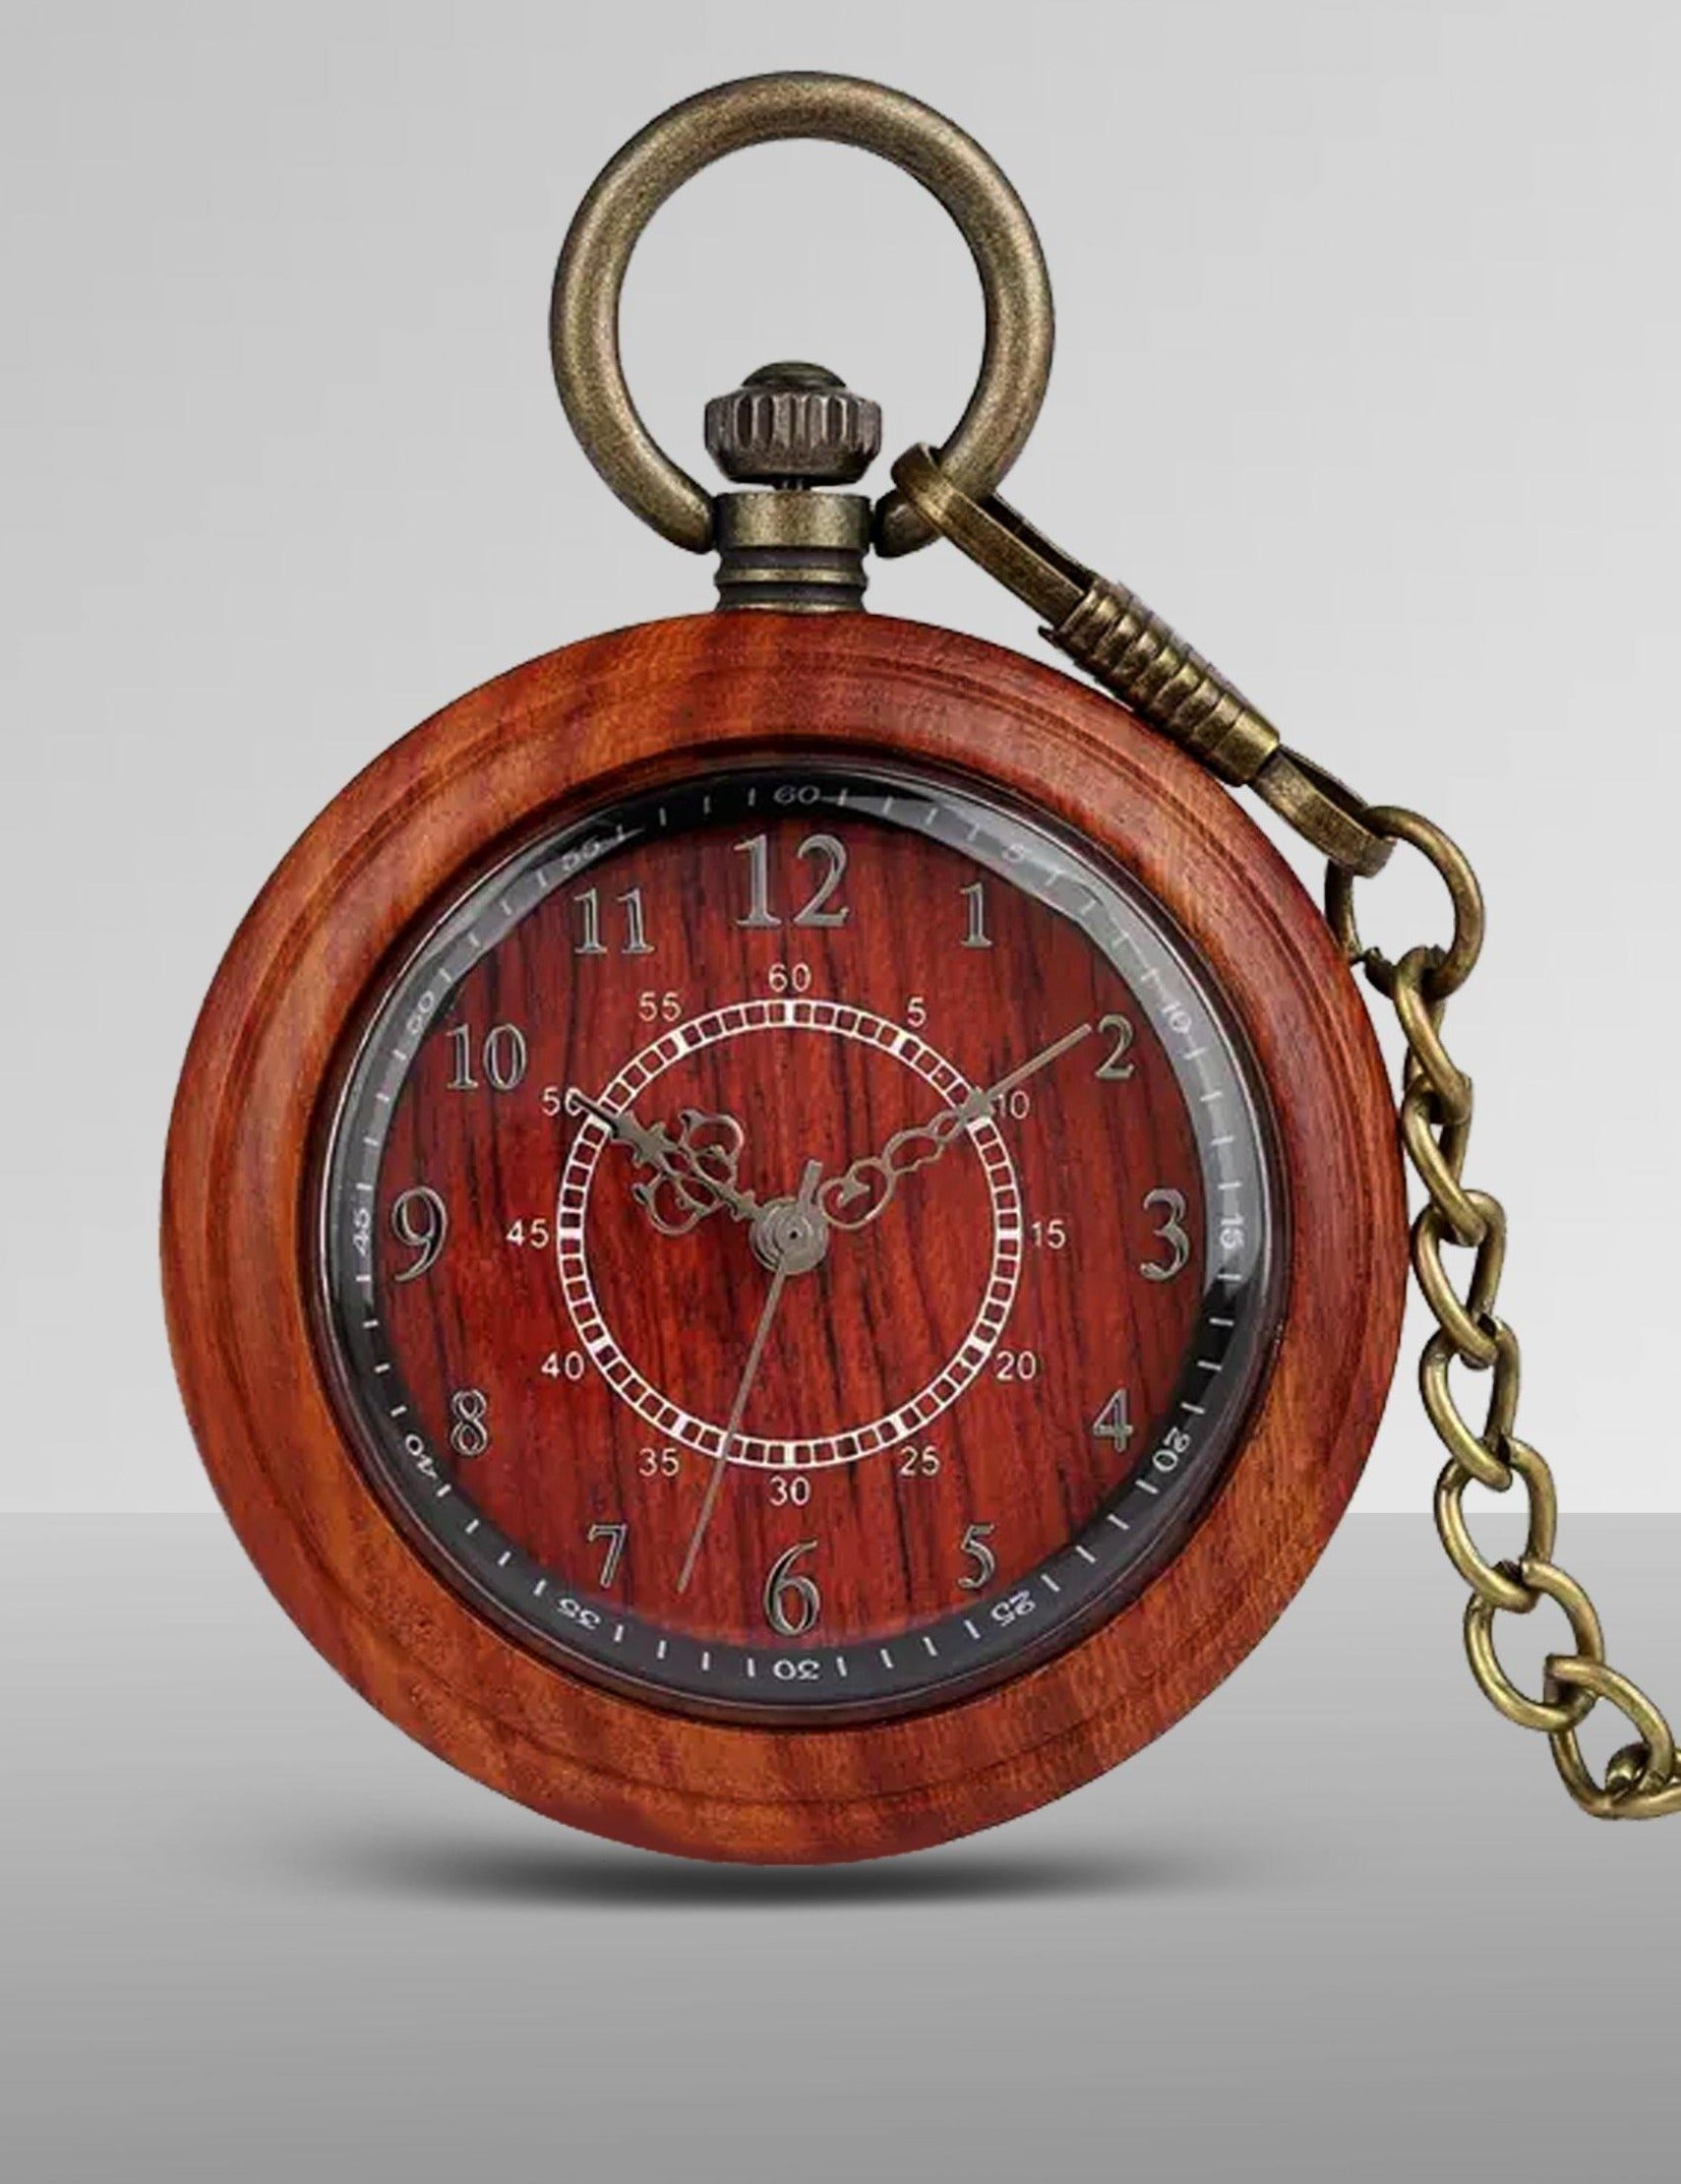 Double Circle Wooden Pocket Watch - The BIG Boy Shop